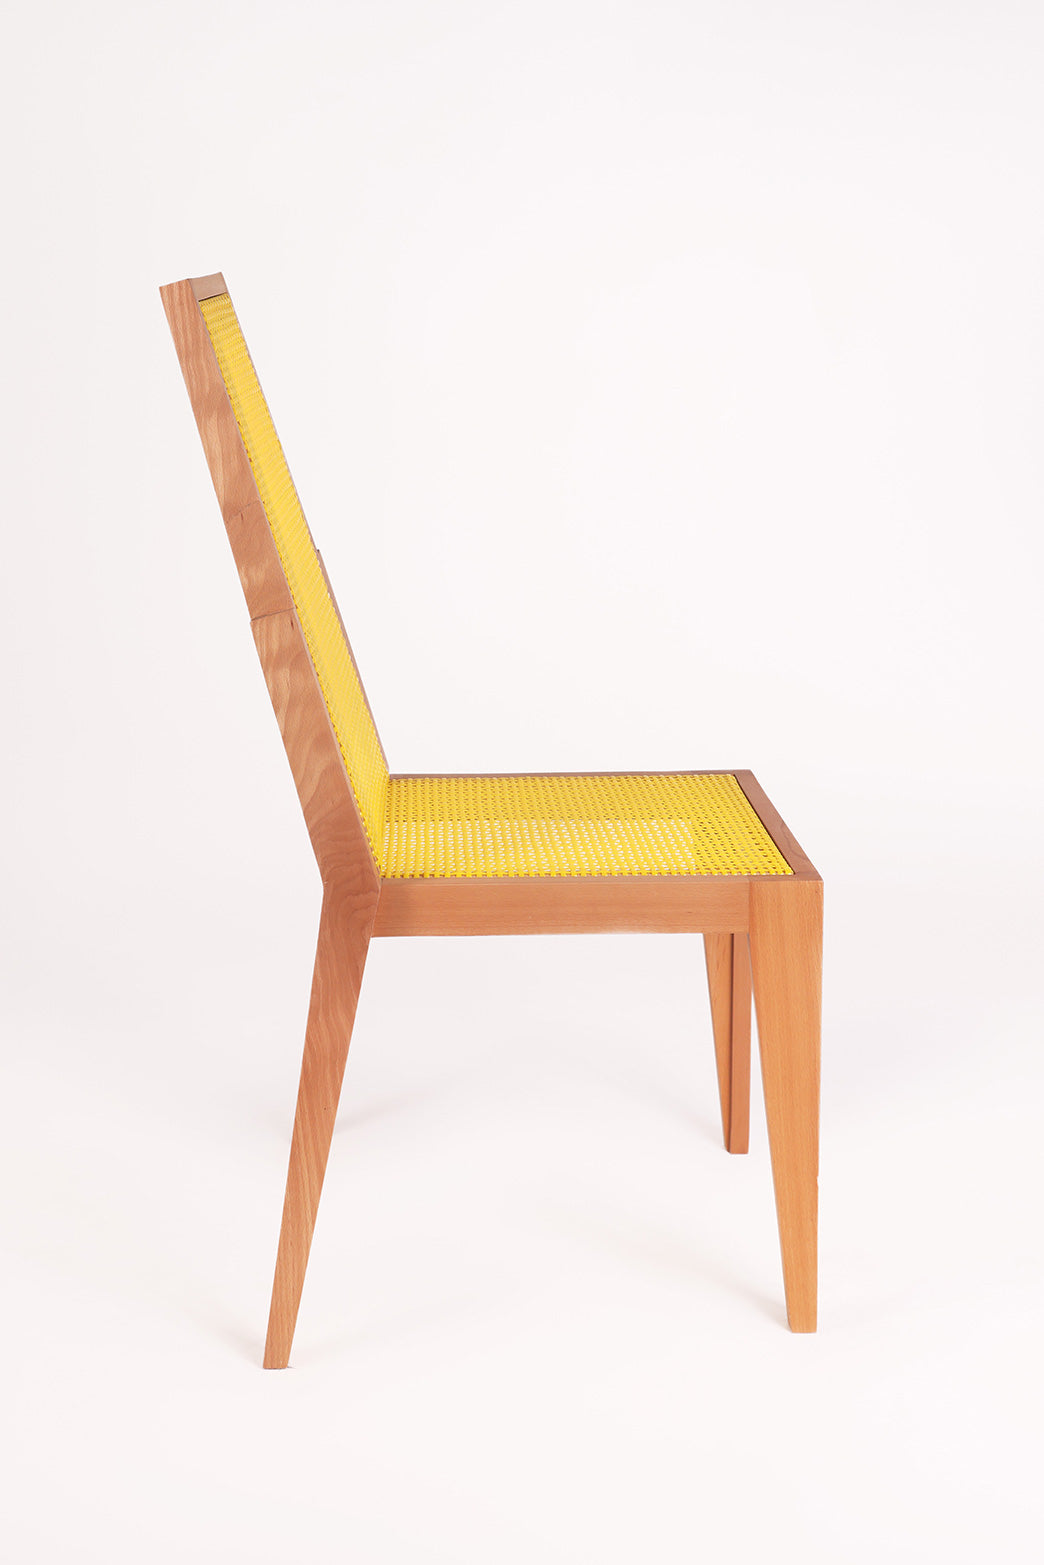 Lisa chair by Adam Nathaniel Furman for Beit Collective, made in Beirut